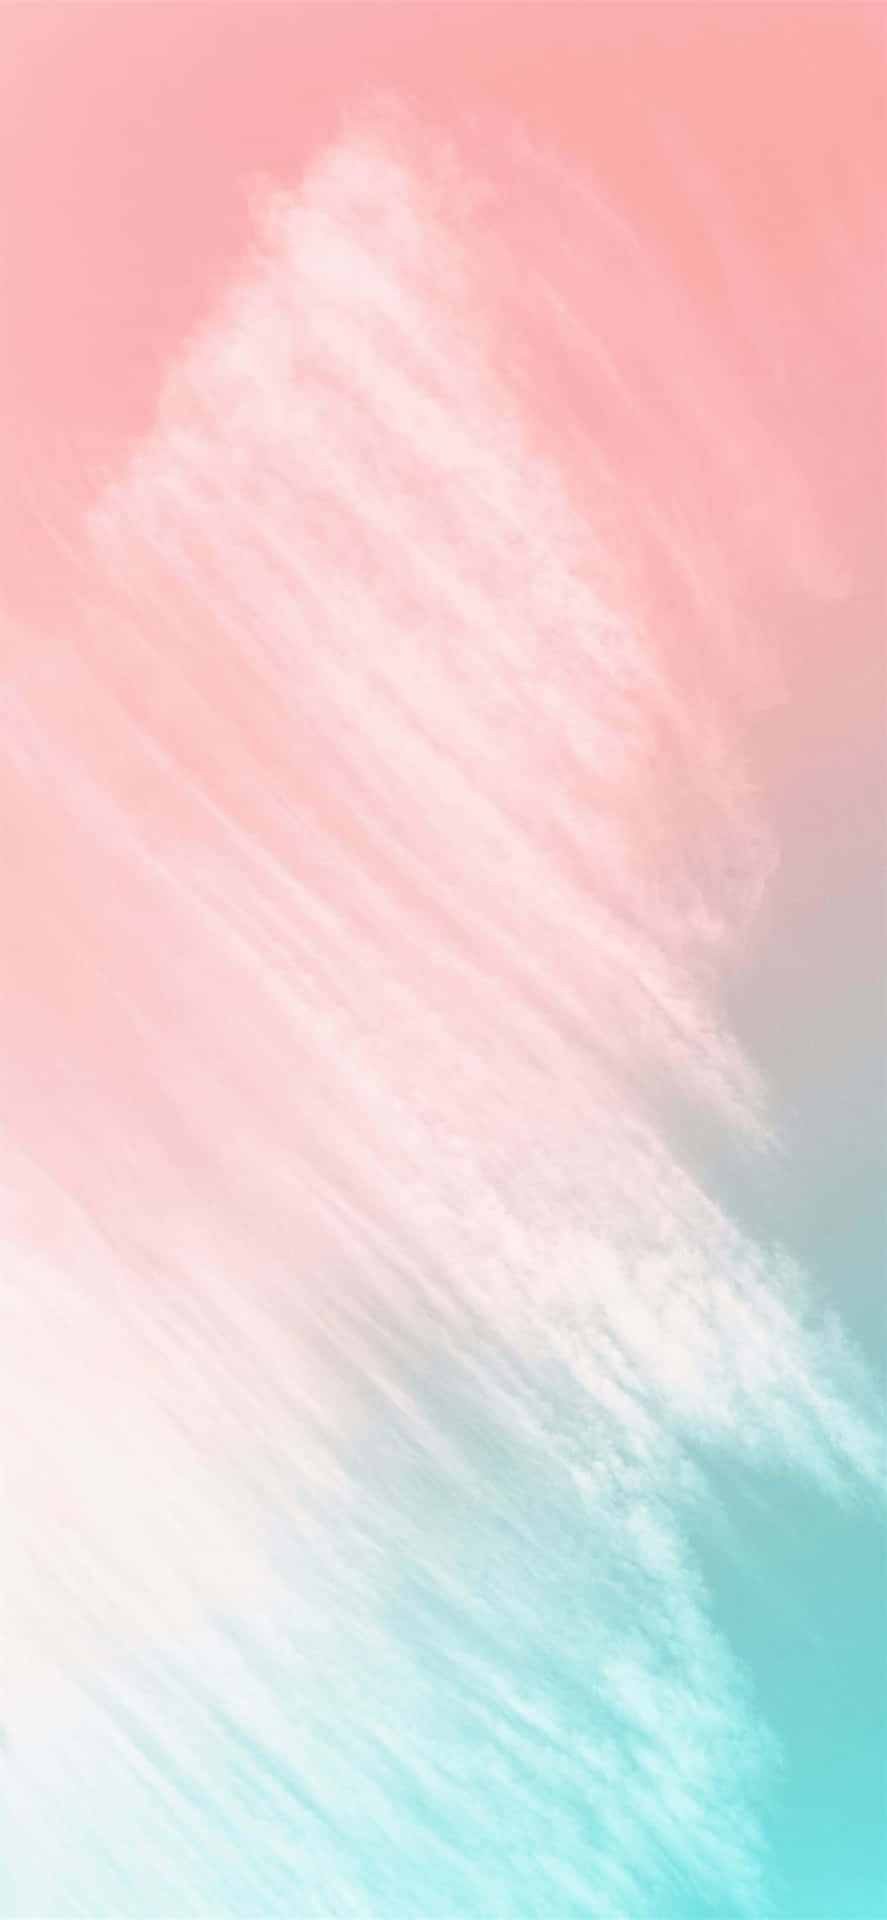 A Pink And Turquoise Background With Clouds Wallpaper